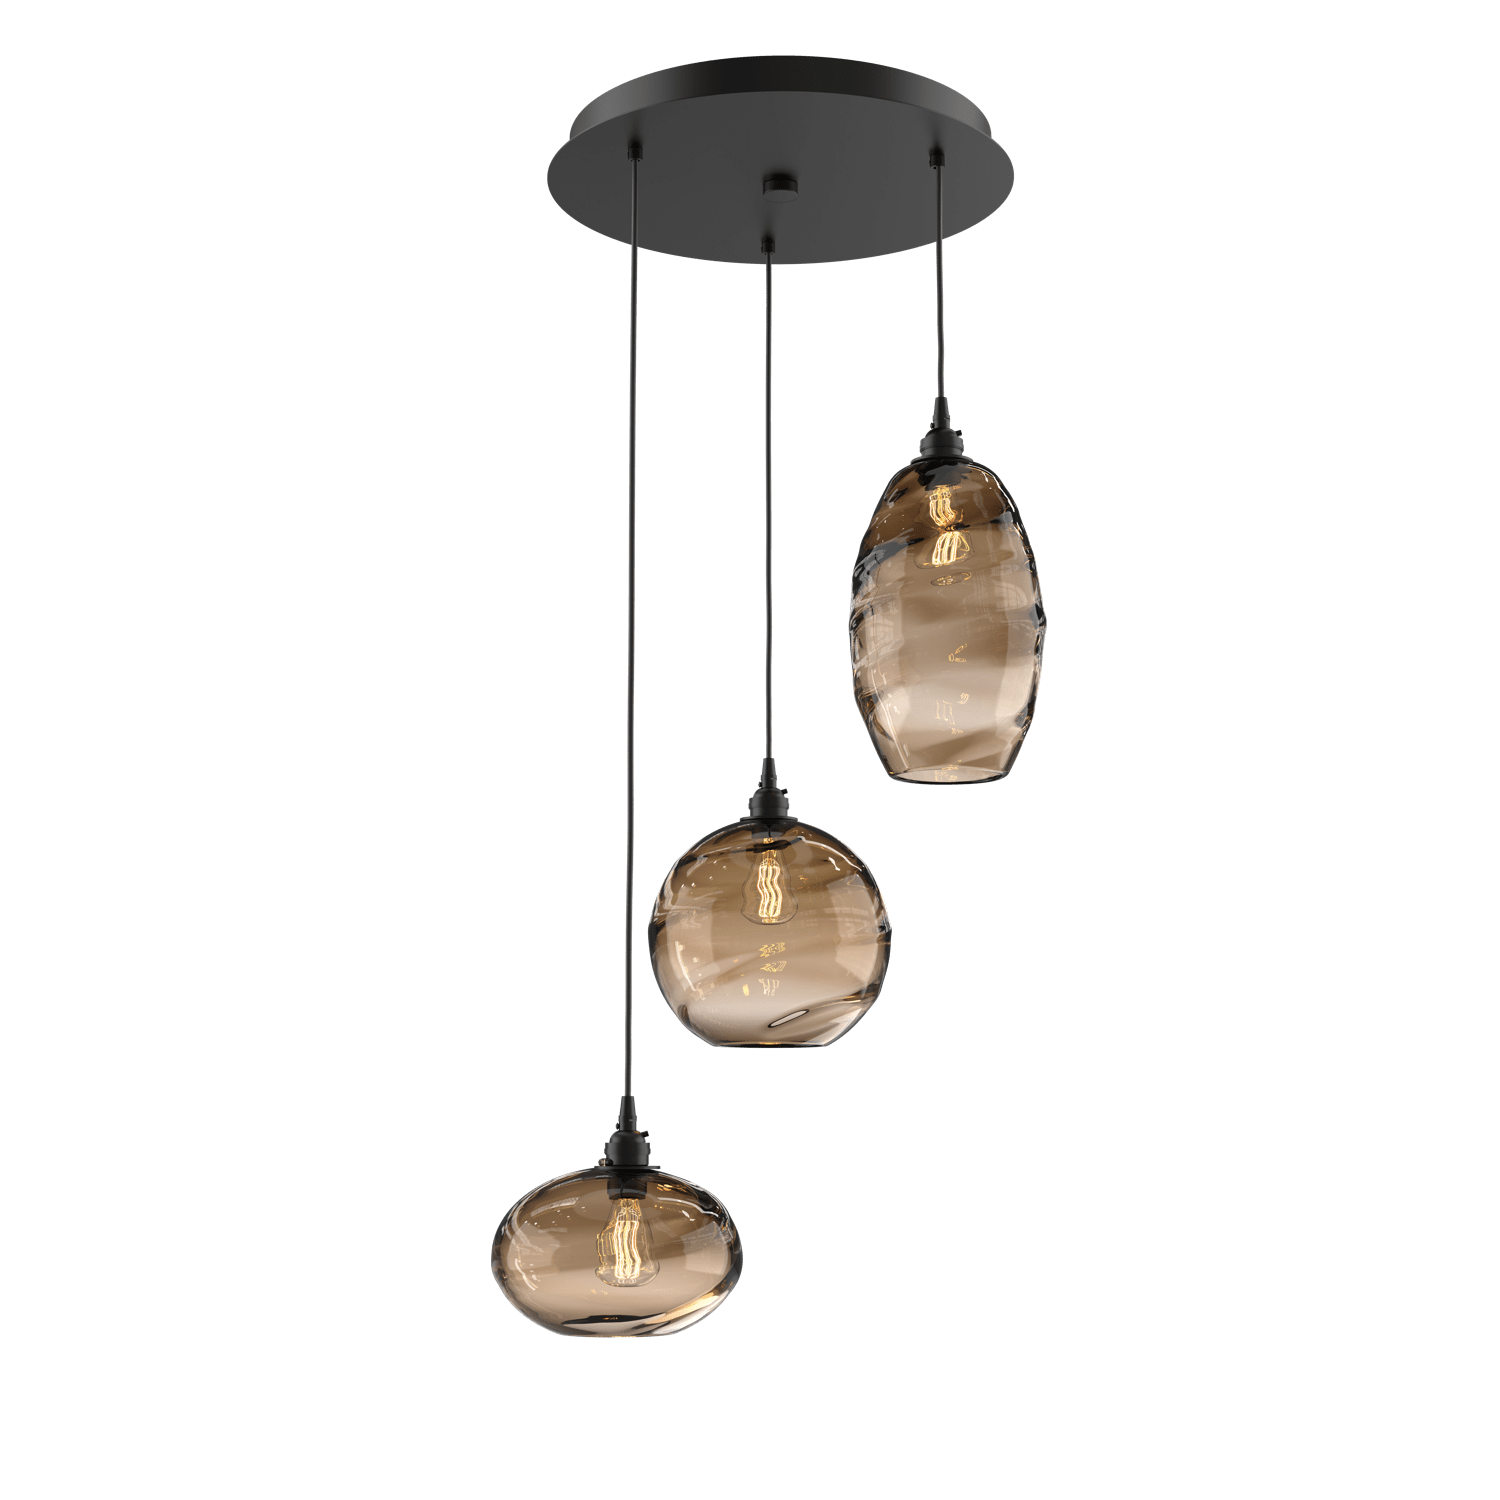 CHB0048-03-MB-OB-Hammerton-Studio-Optic-Blown-Glass-Misto-3-light-round-pendant-chandelier-with-matte-black-finish-and-optic-bronze-blown-glass-shades-and-incandescent-lamping